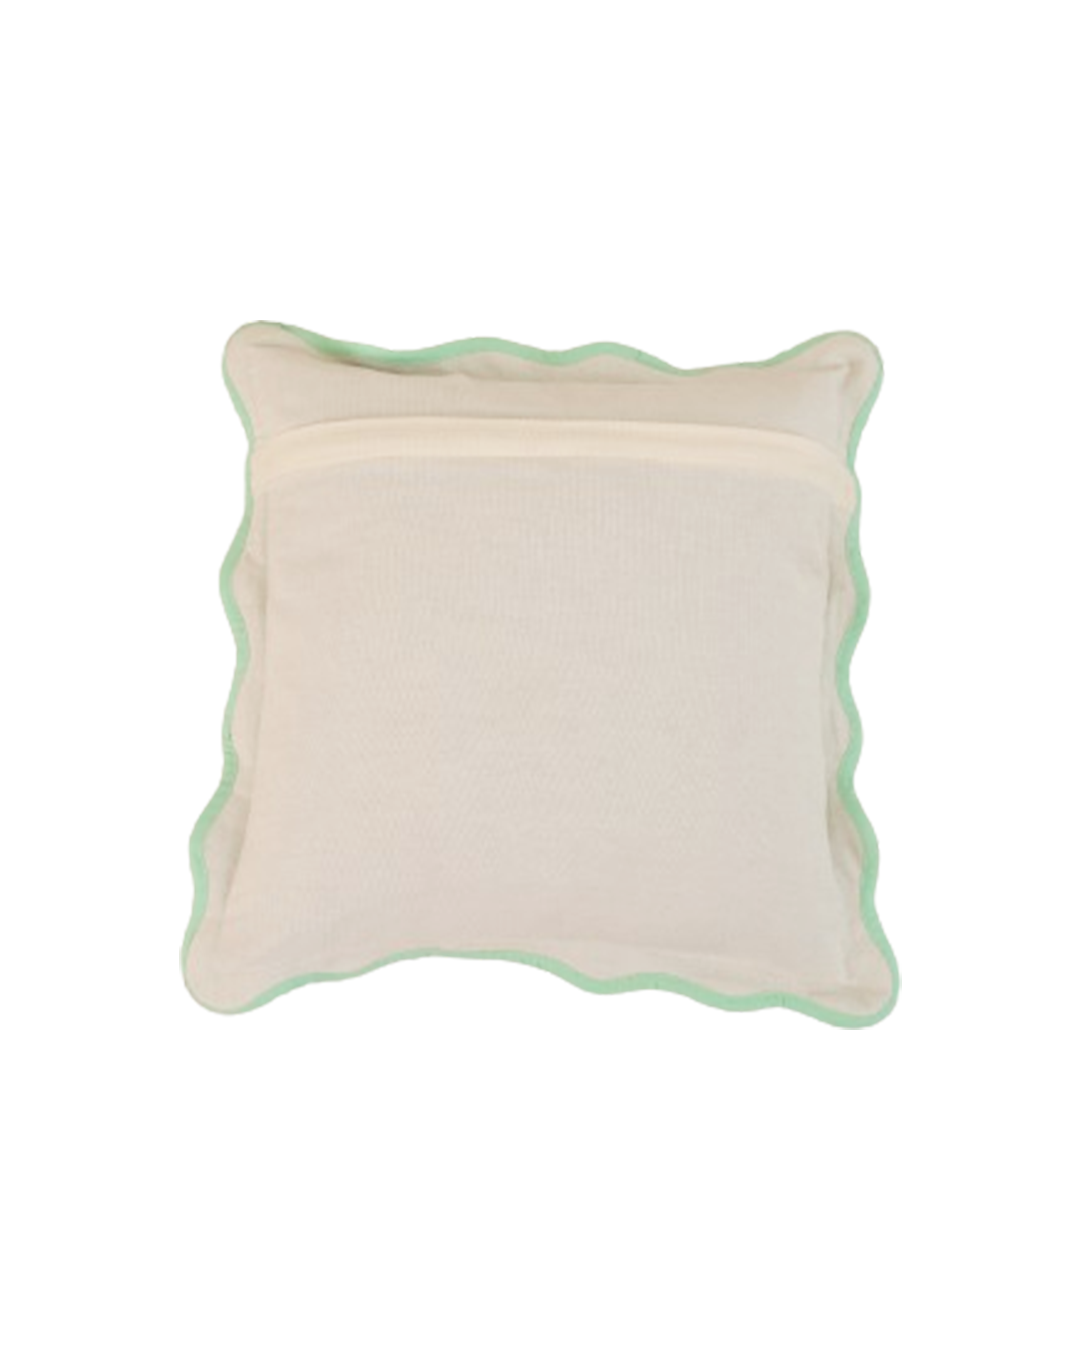 Scallop Accent Cushion 16x16 Inches, Green